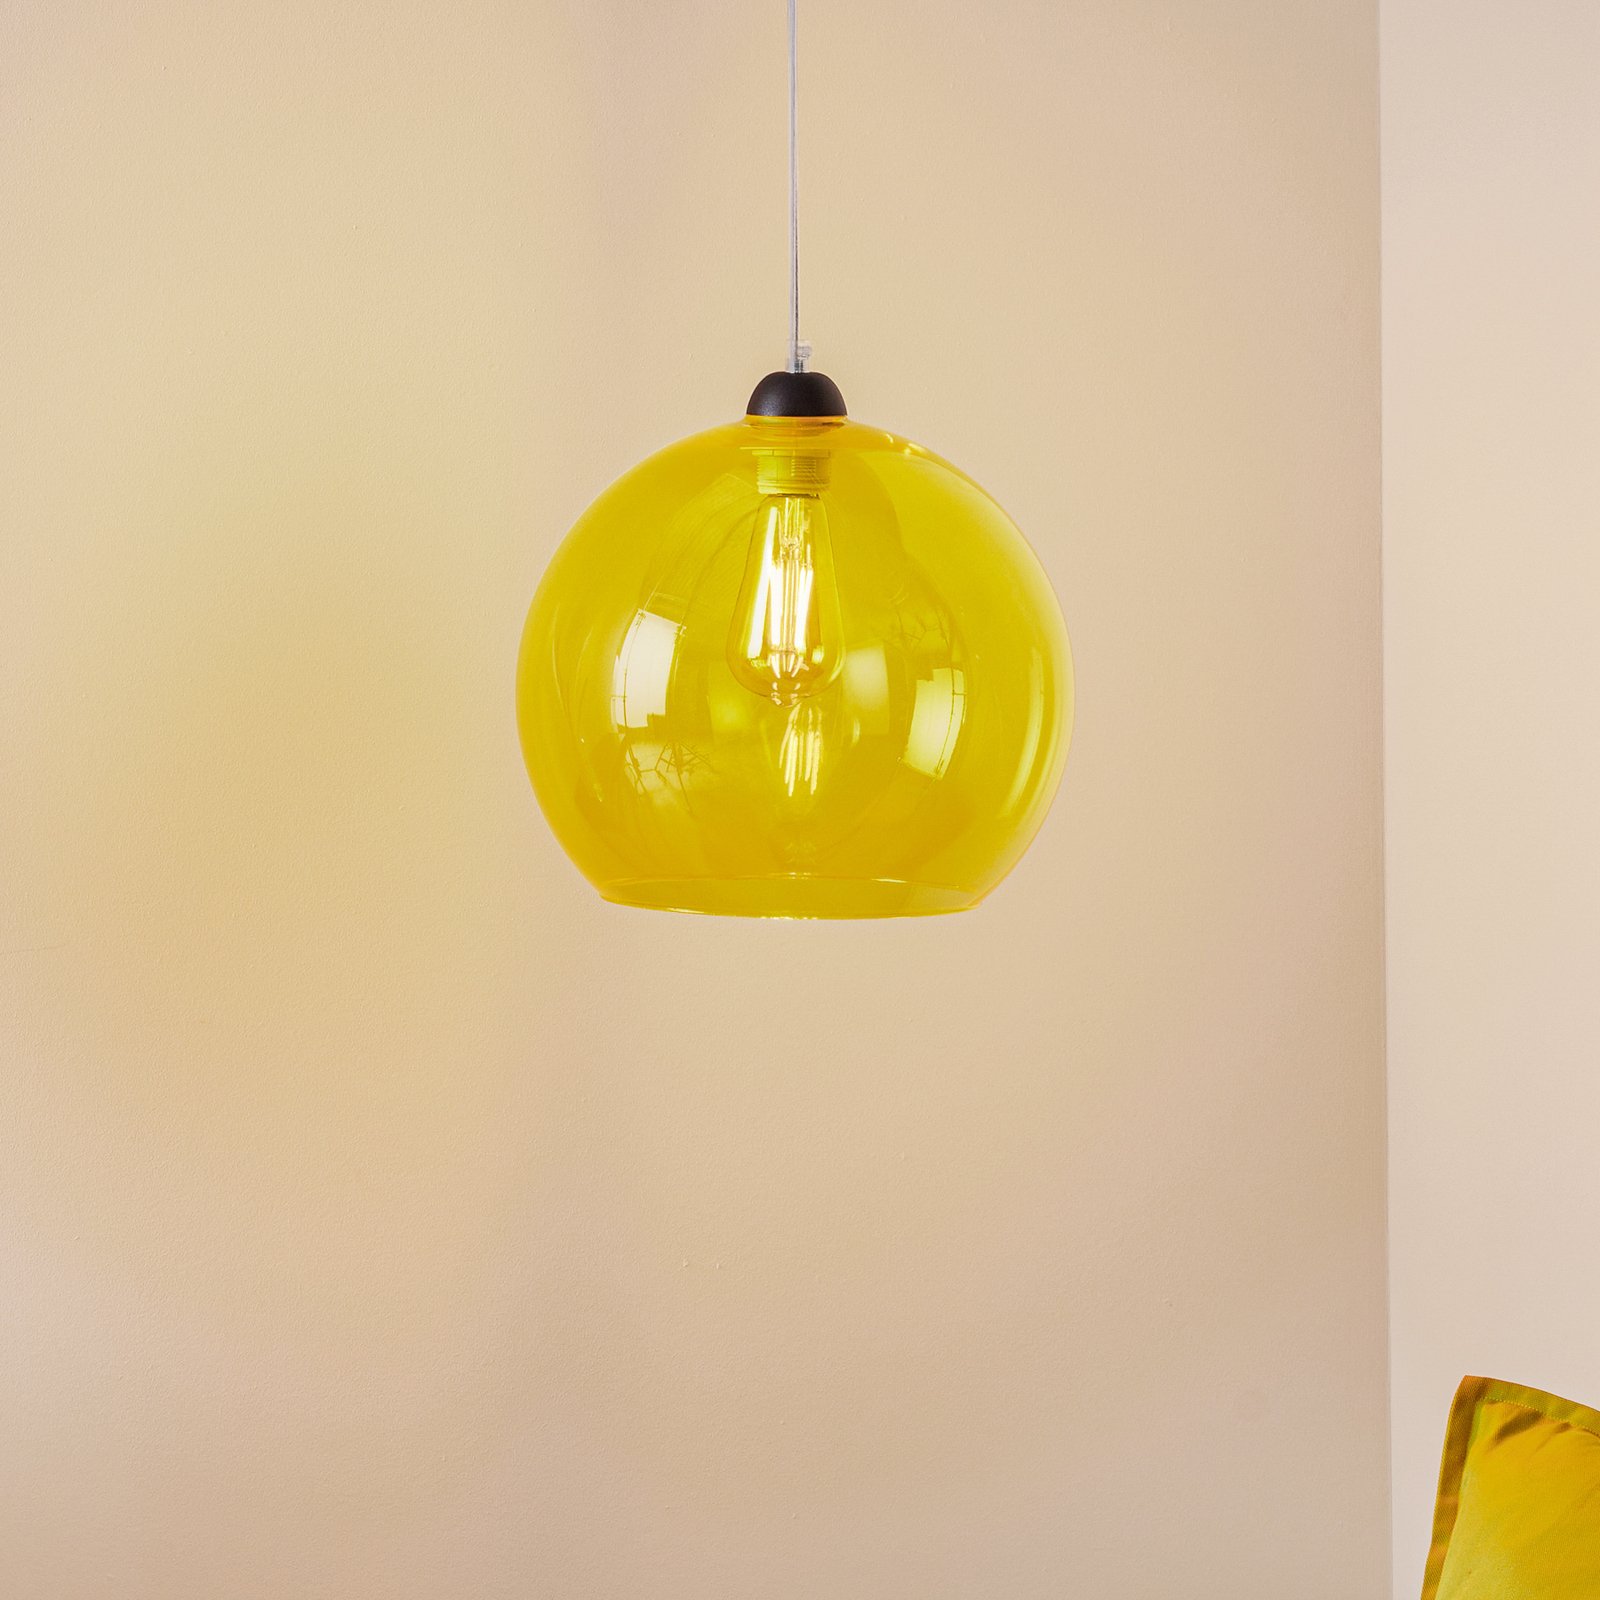 Colour hanging light, yellow glass lampshade